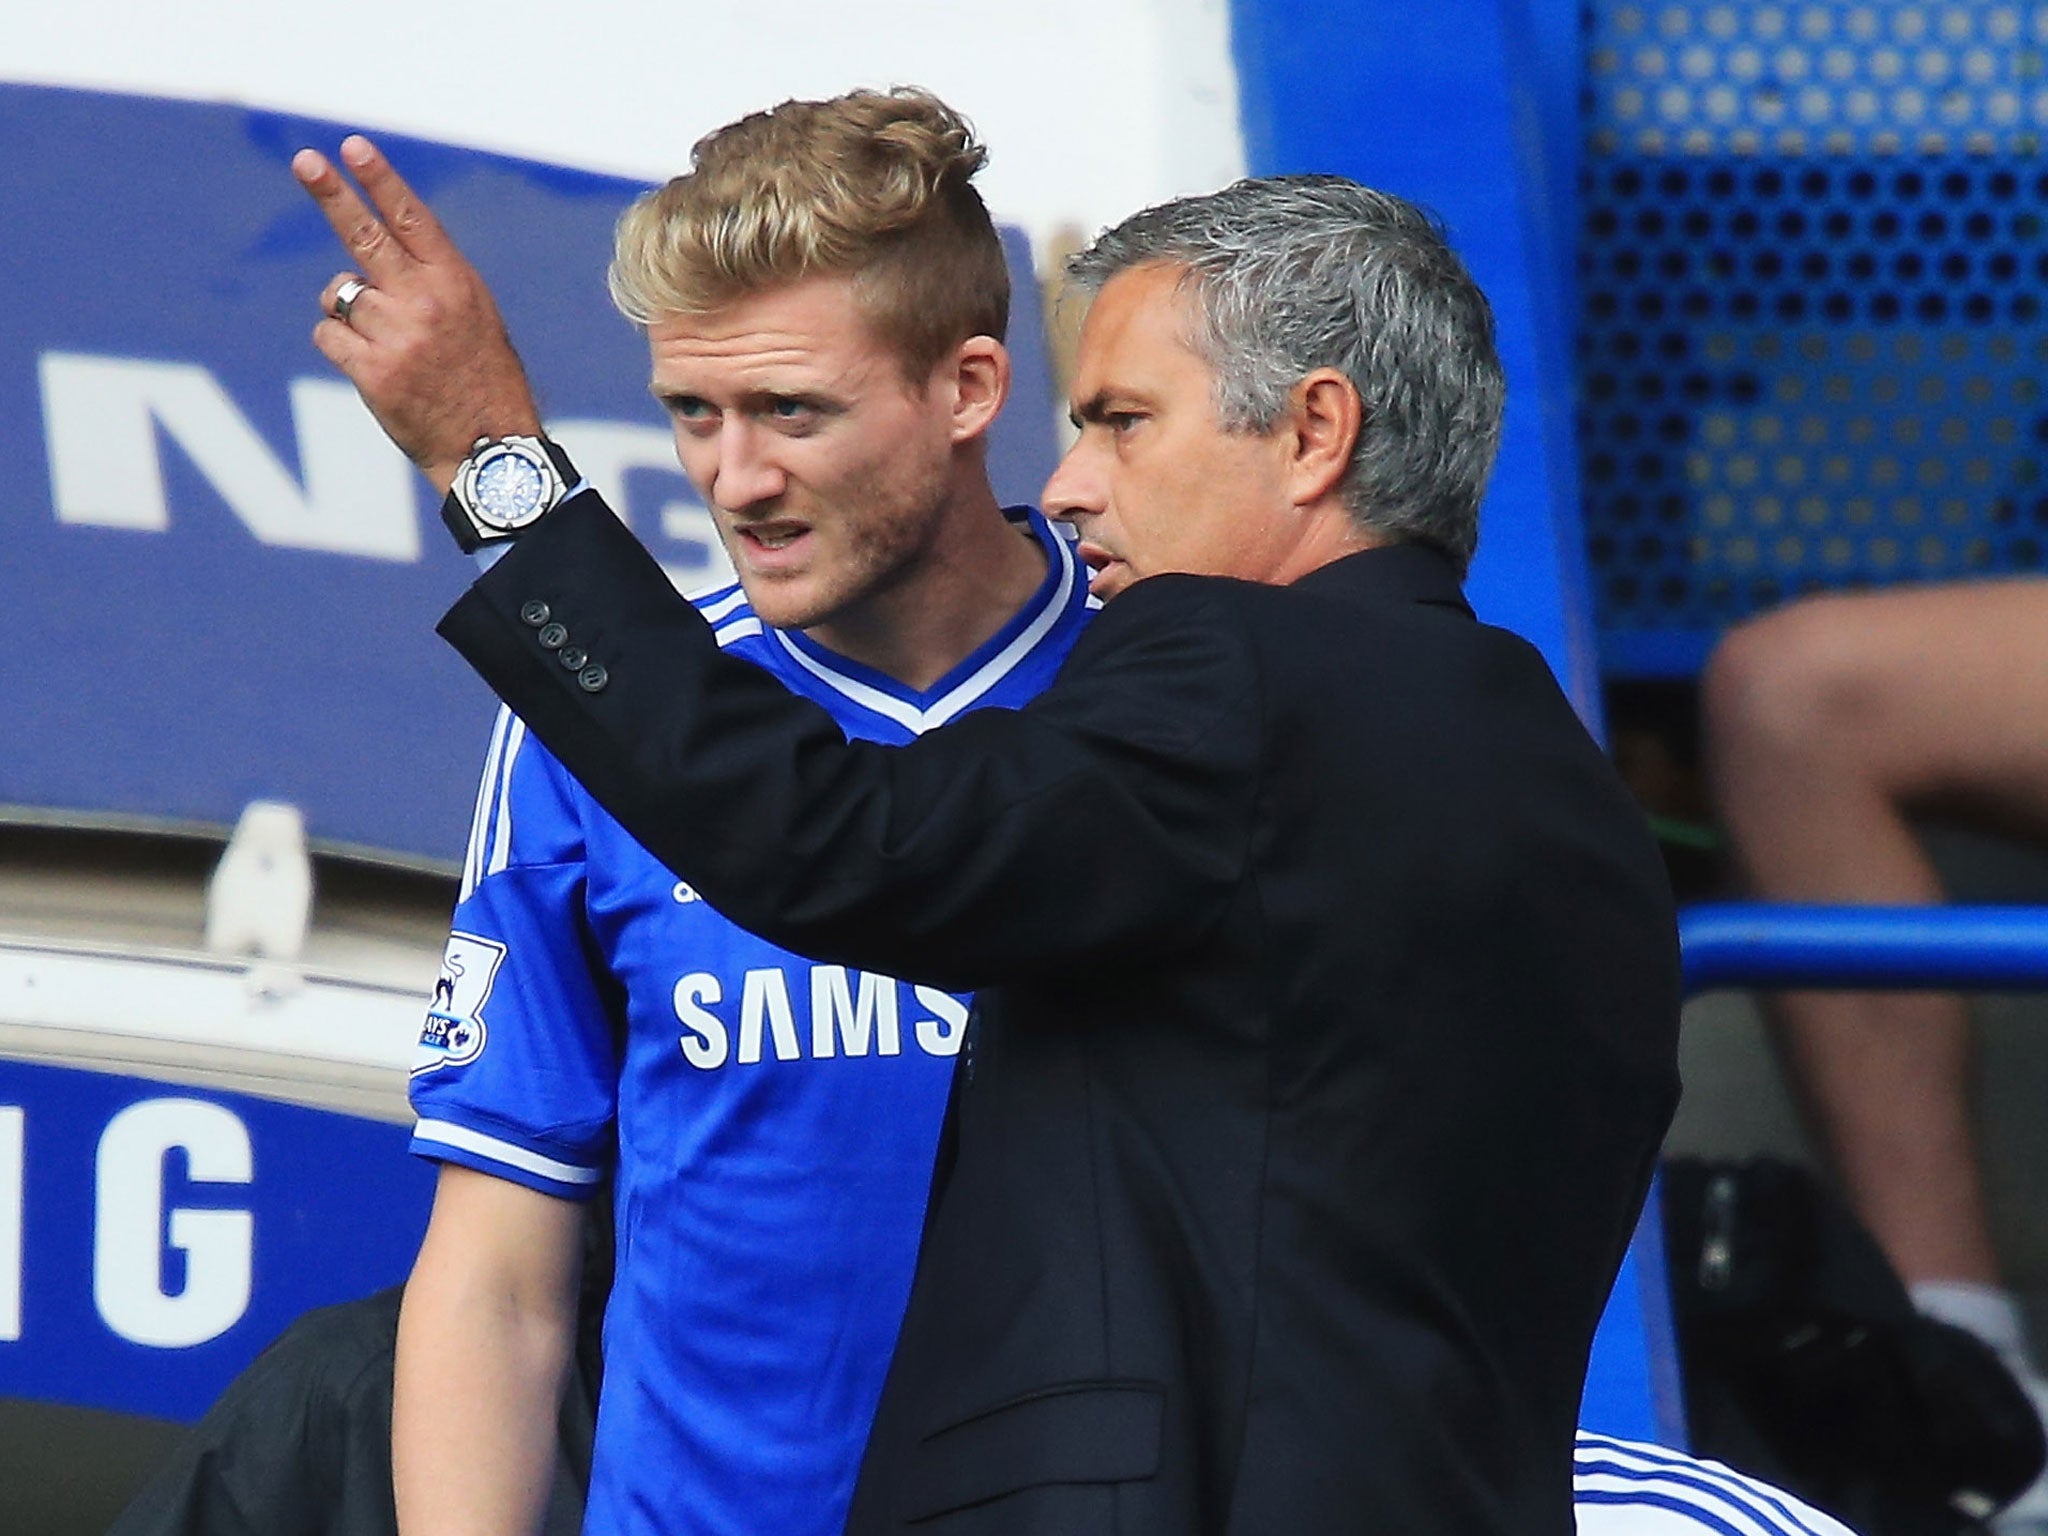 Andre Schurrle is brought on from the bench by Jose Mourinho in Chelsea's 2-0 win over Hull